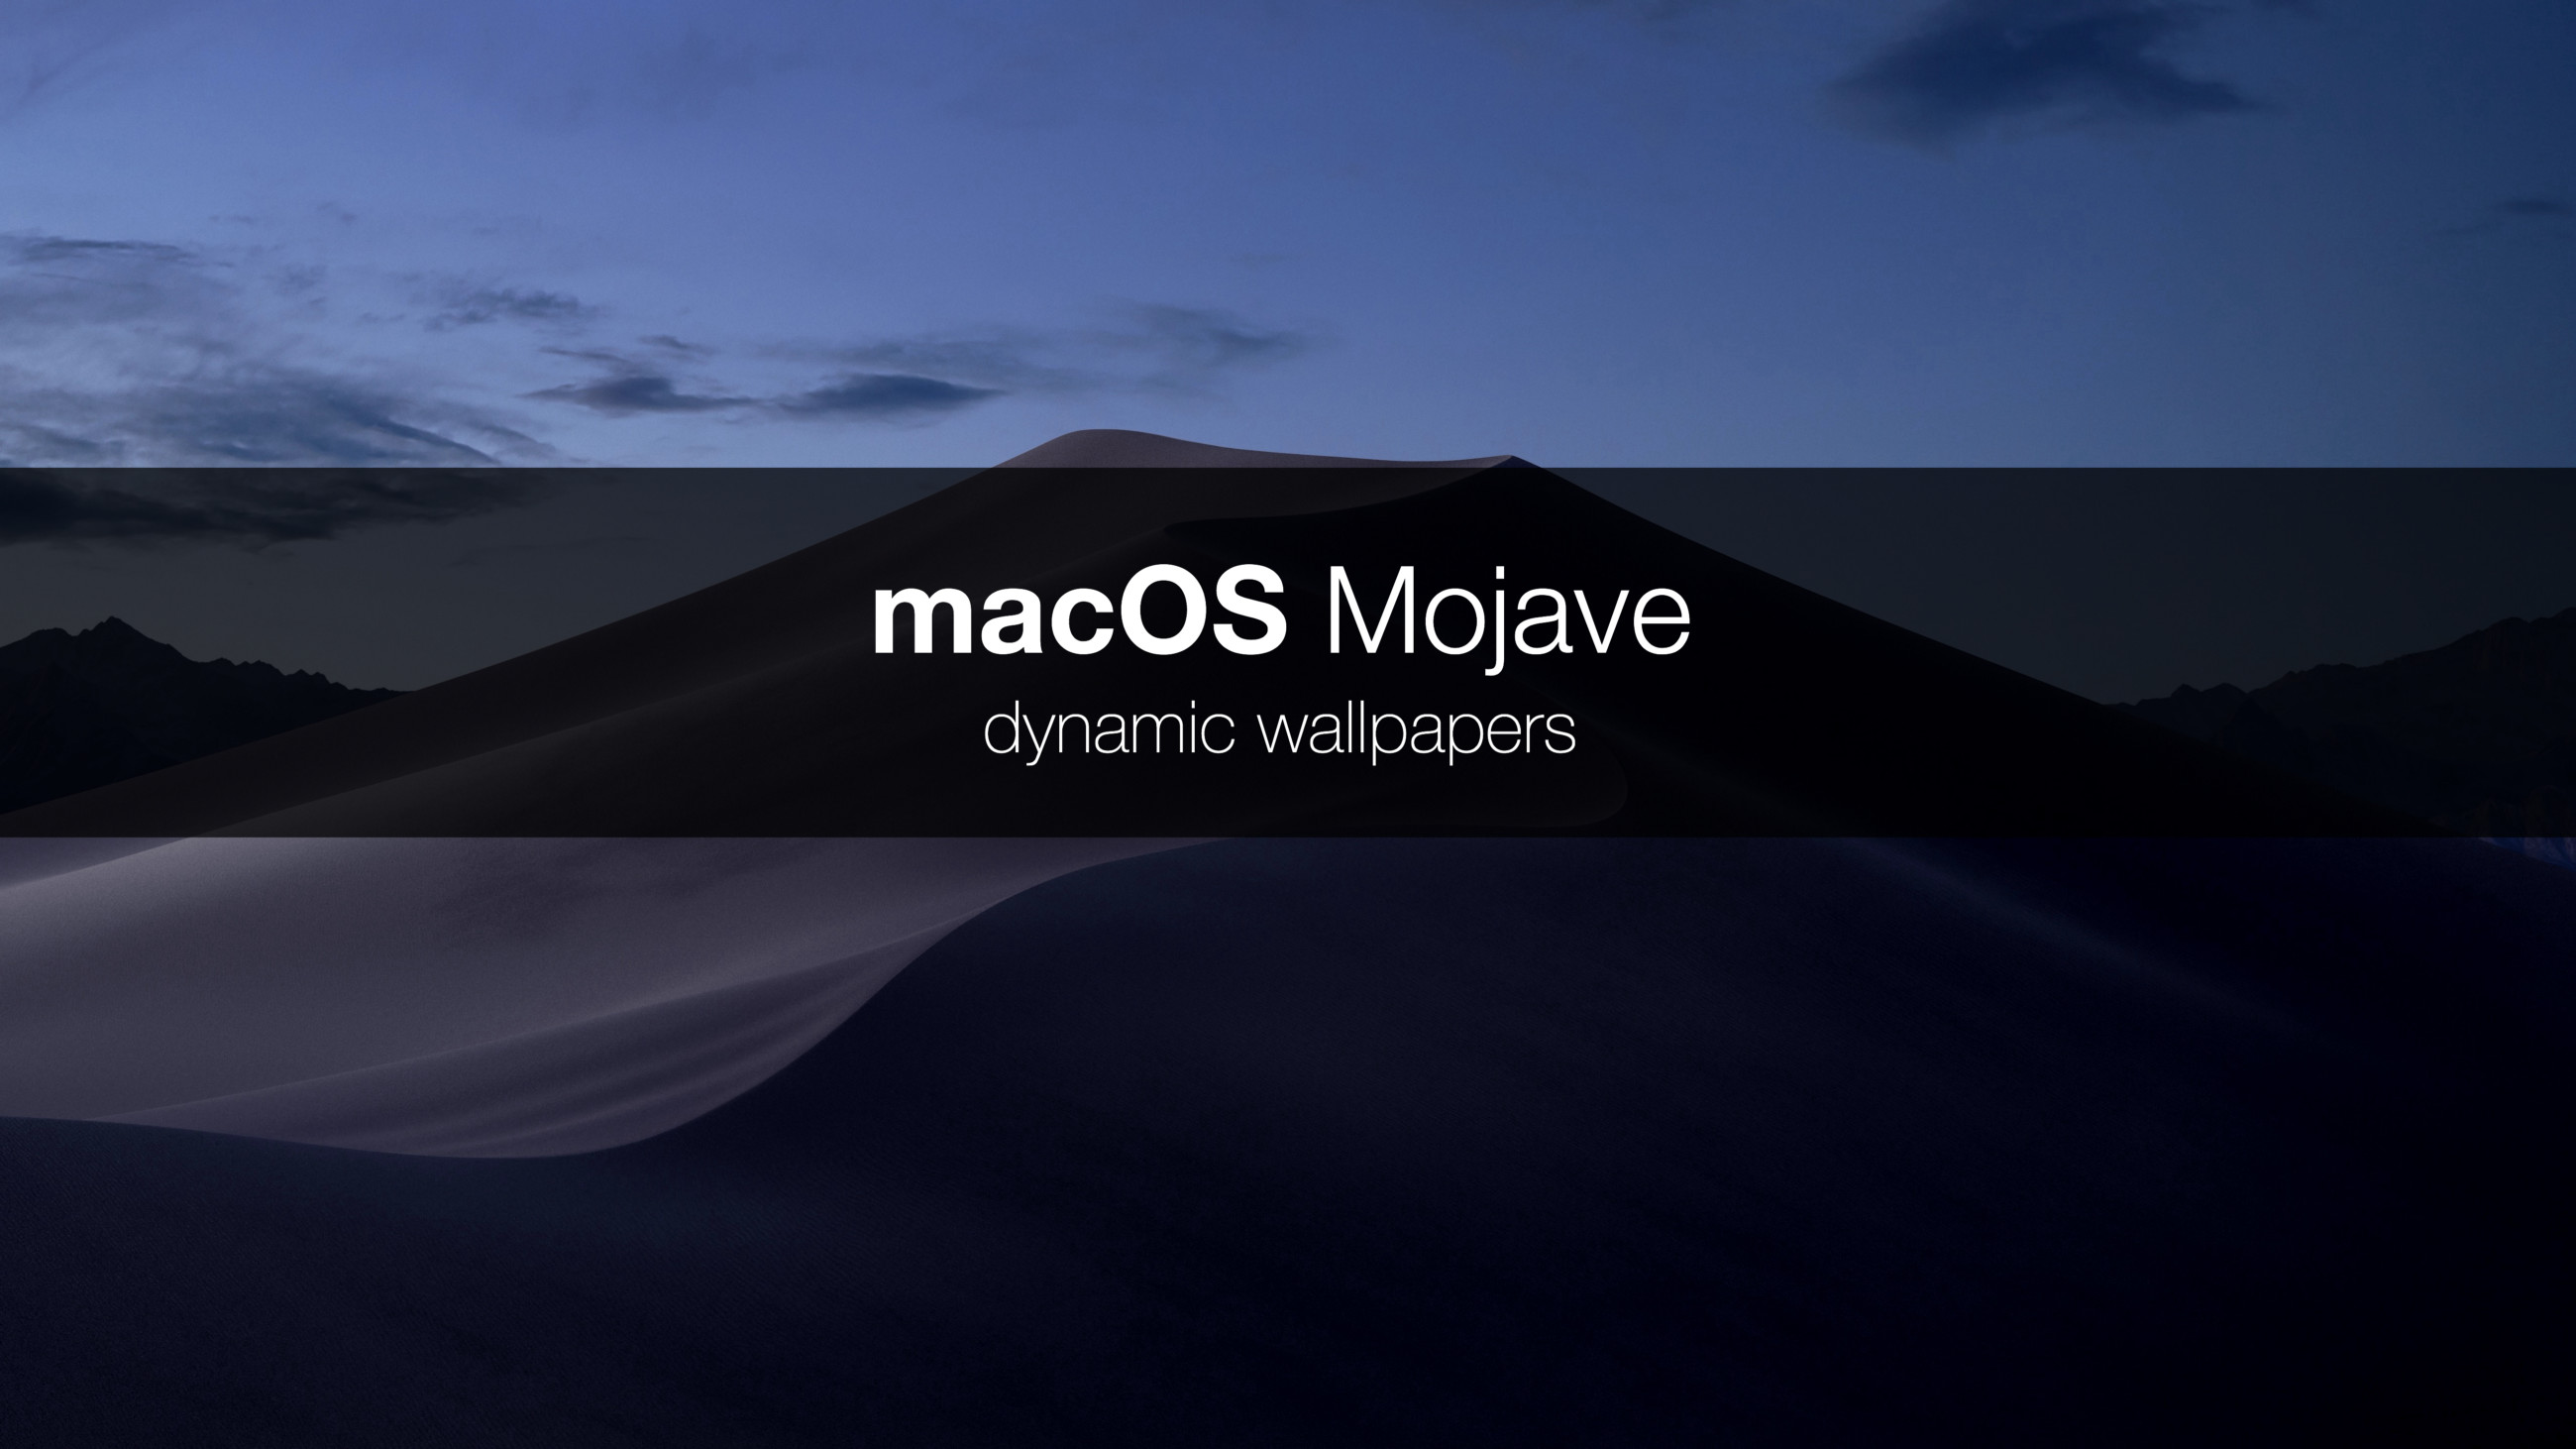 2600x1462 How Apple built dynamic wallpapers? And is it possible to create your own  dynamic wallpaper for macOS? I spent some time because I would like to  answer to ...